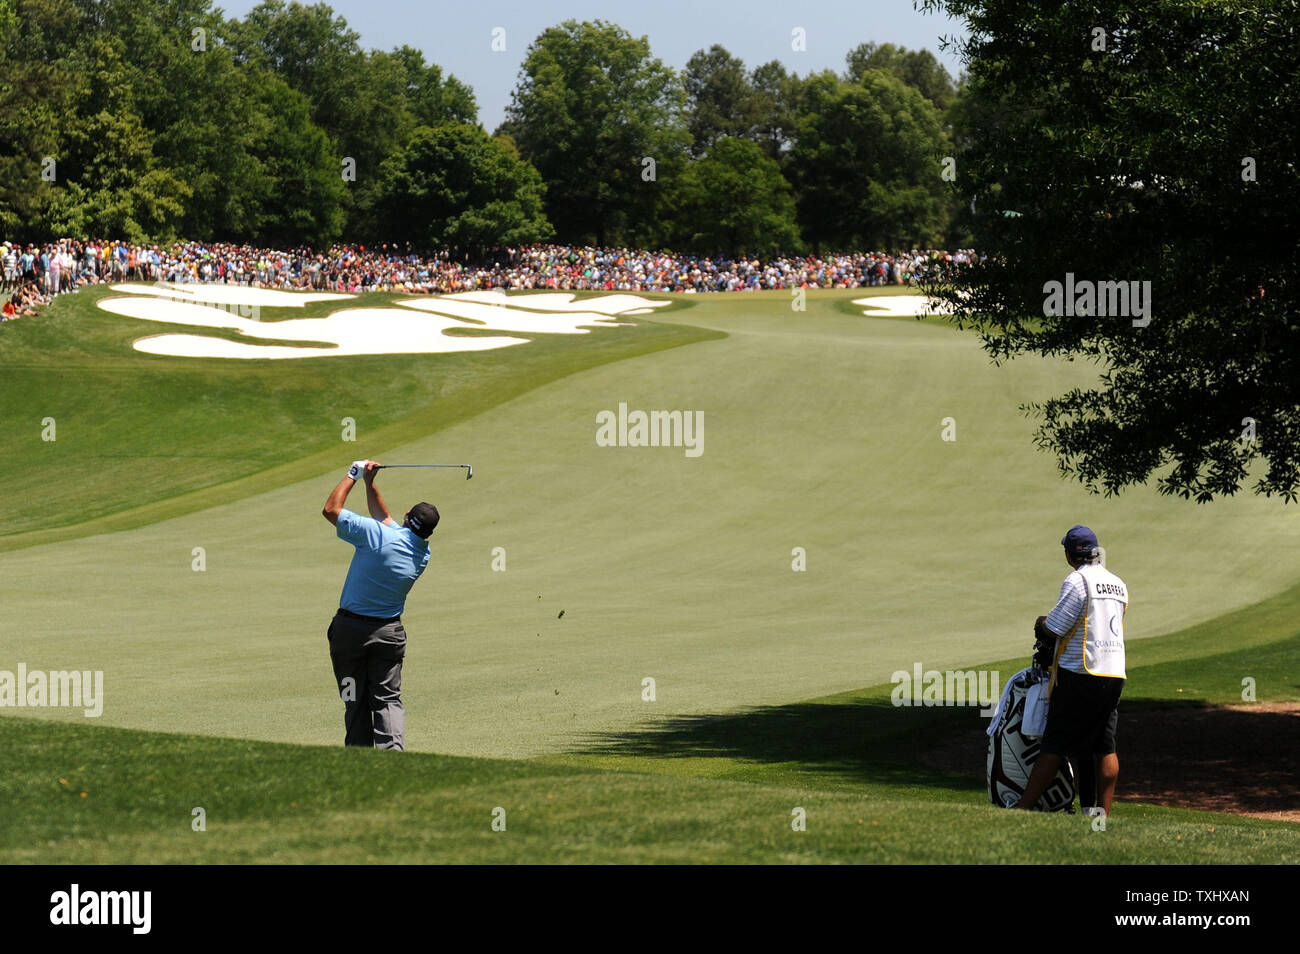 Angle Cabrera hits down the 7th fairway during the second round of the Quail Hollow Tournament in Charlotte, North Carolina on April 30, 2010.   UPI/Kevin Dietsch Stock Photo